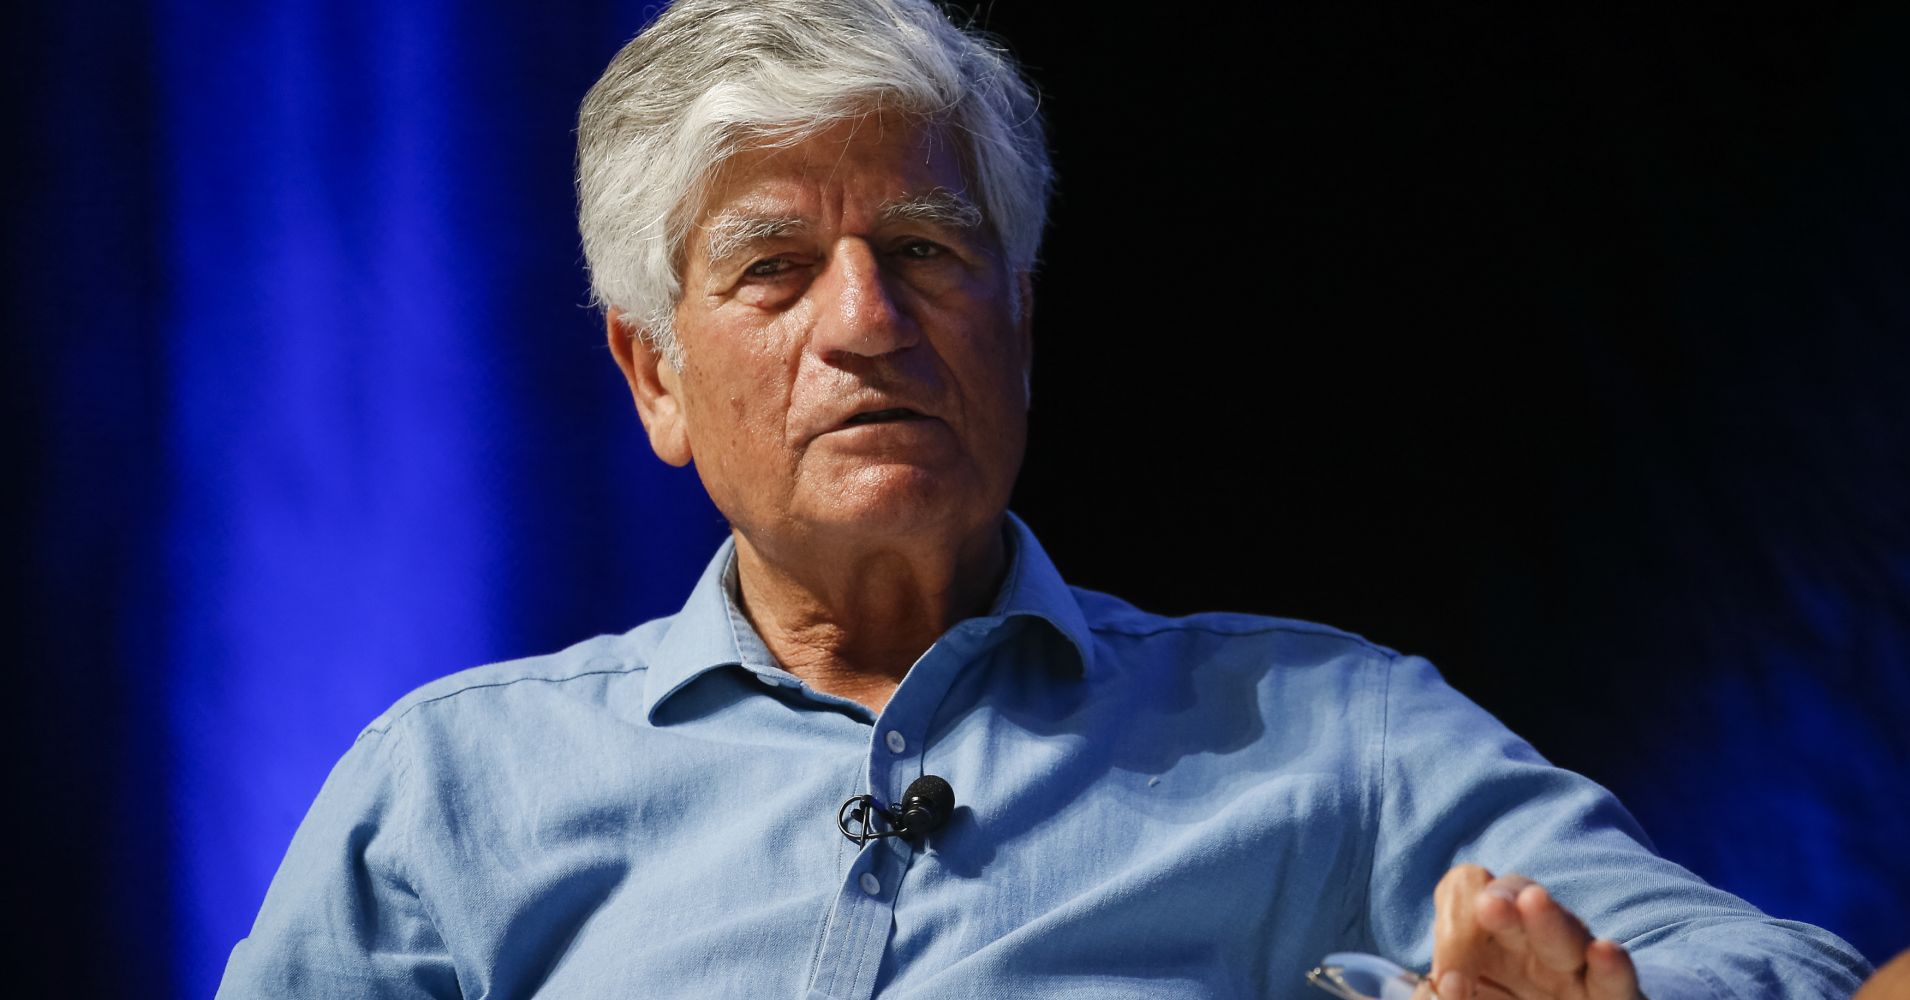 Chairman of Publicis Groupe Maurice Levy speaks during the 'Can Creativity Change the World?' seminar during the Cannes Lions Festival 2017